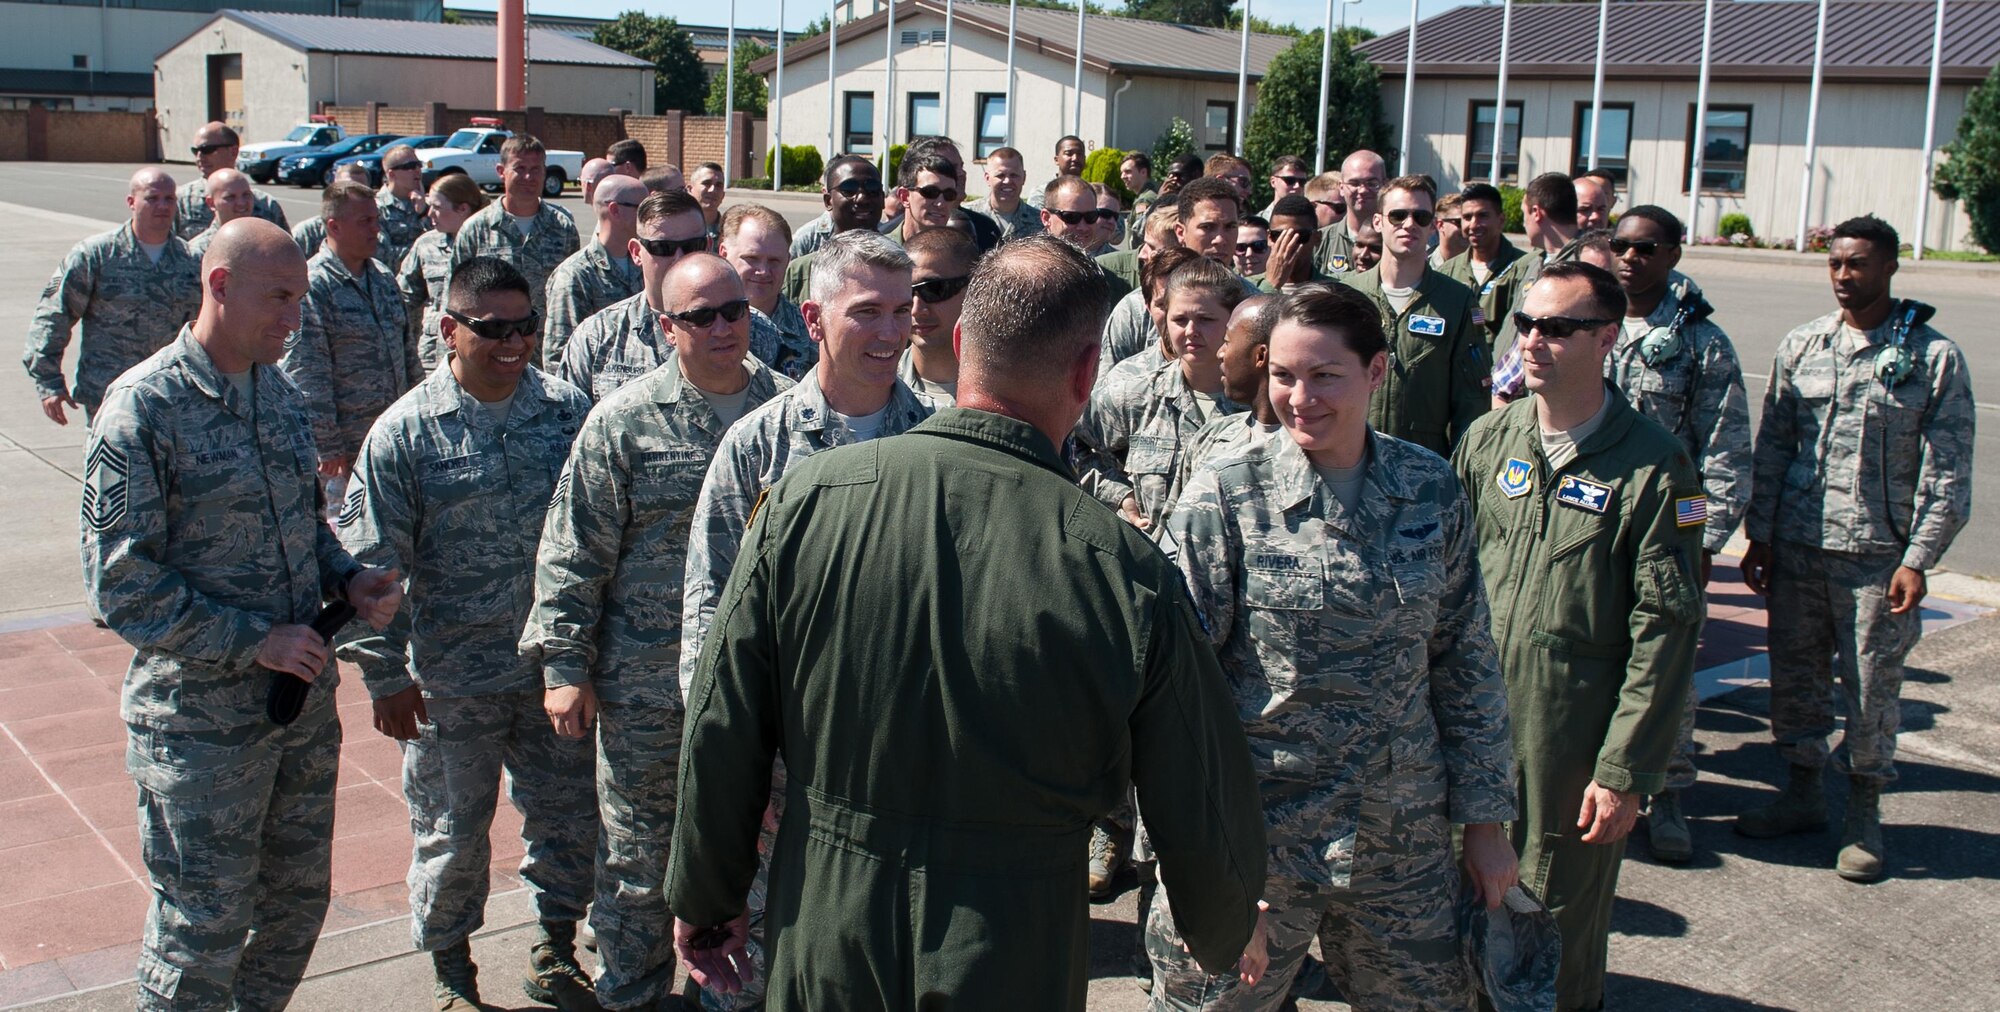 Airmen approach Brig. Gen. Jon T. Thomas, 86th Airlift Wing commander, after his “fini flight” July 21, 2016, at Ramstein Air Base, Germany. Airmen traditionally come out to greet their commanders after their final flight. (U.S. Air Force photo/Airman 1st Class Lane T. Plummer)